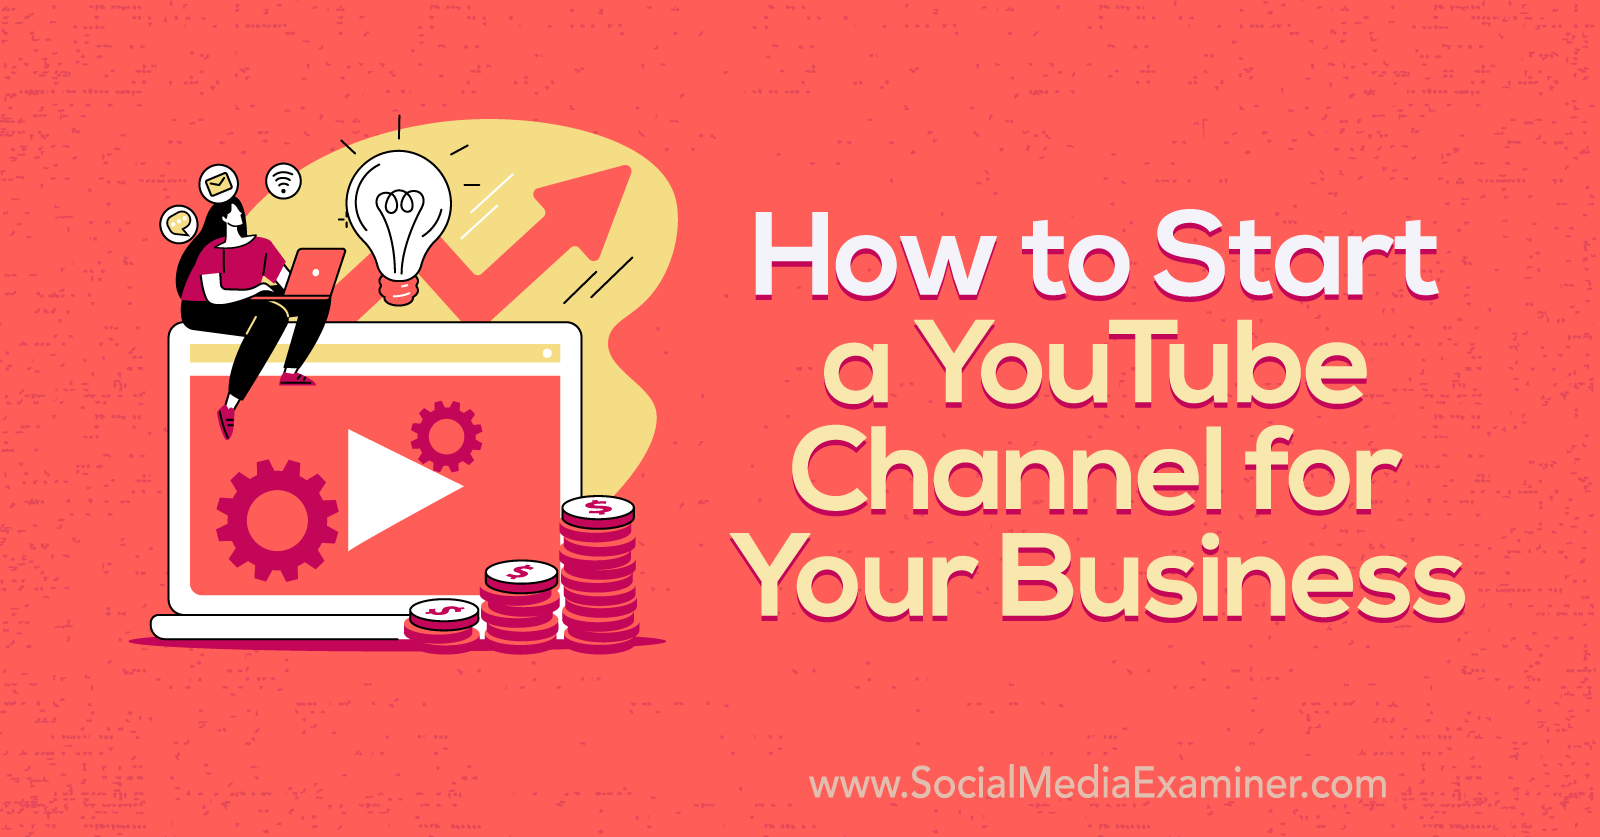 How to Start a YouTube Channel for Your Business : Social Media Examiner